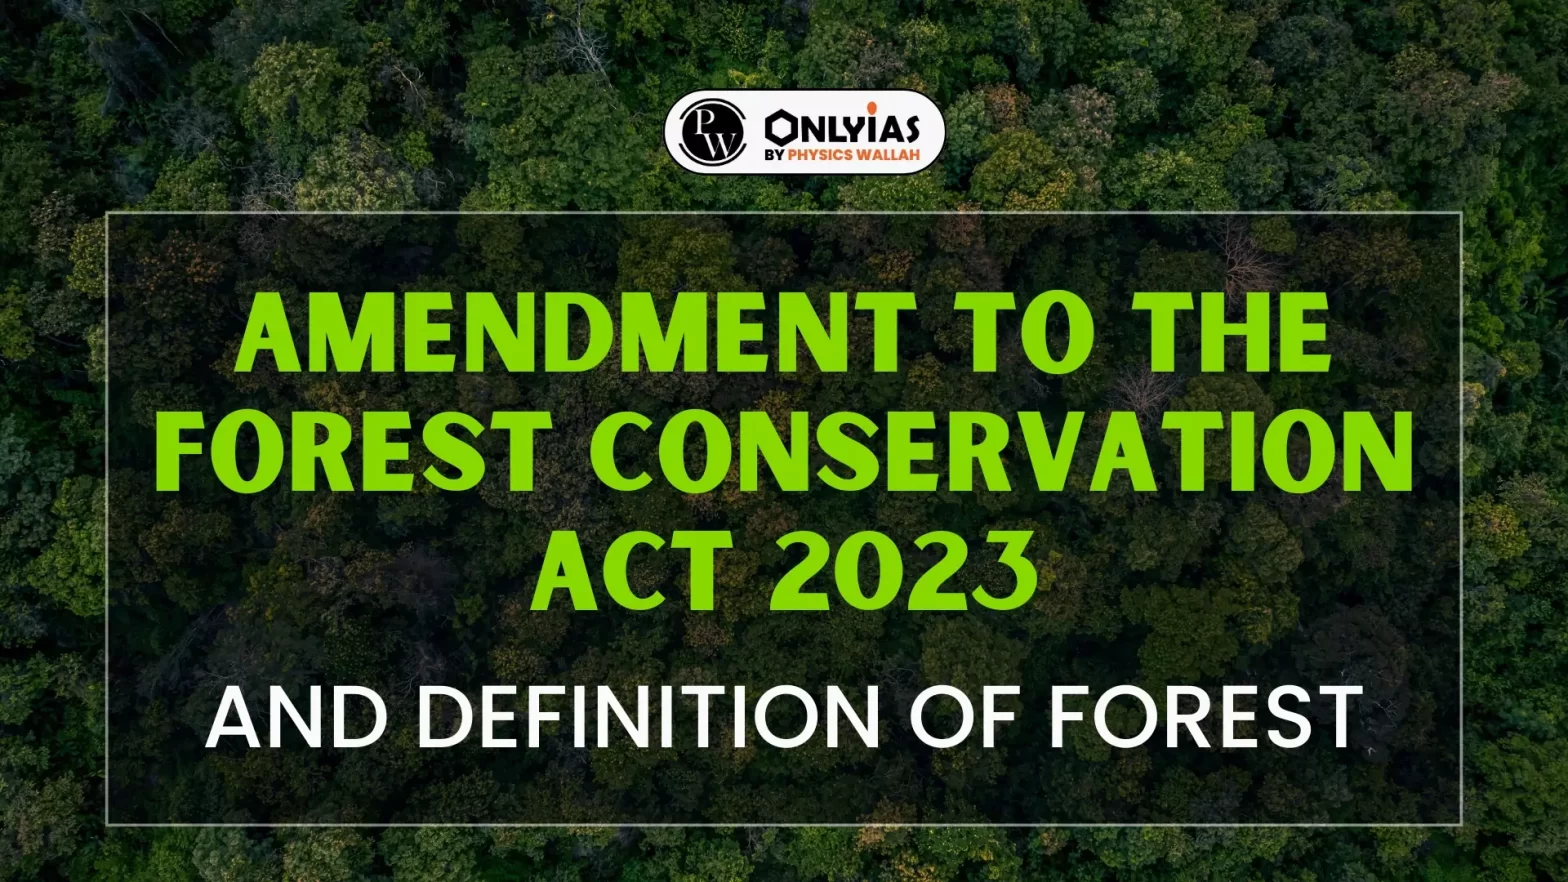 Amendment to the Forest Conservation Act 2023 and Definition of Forest